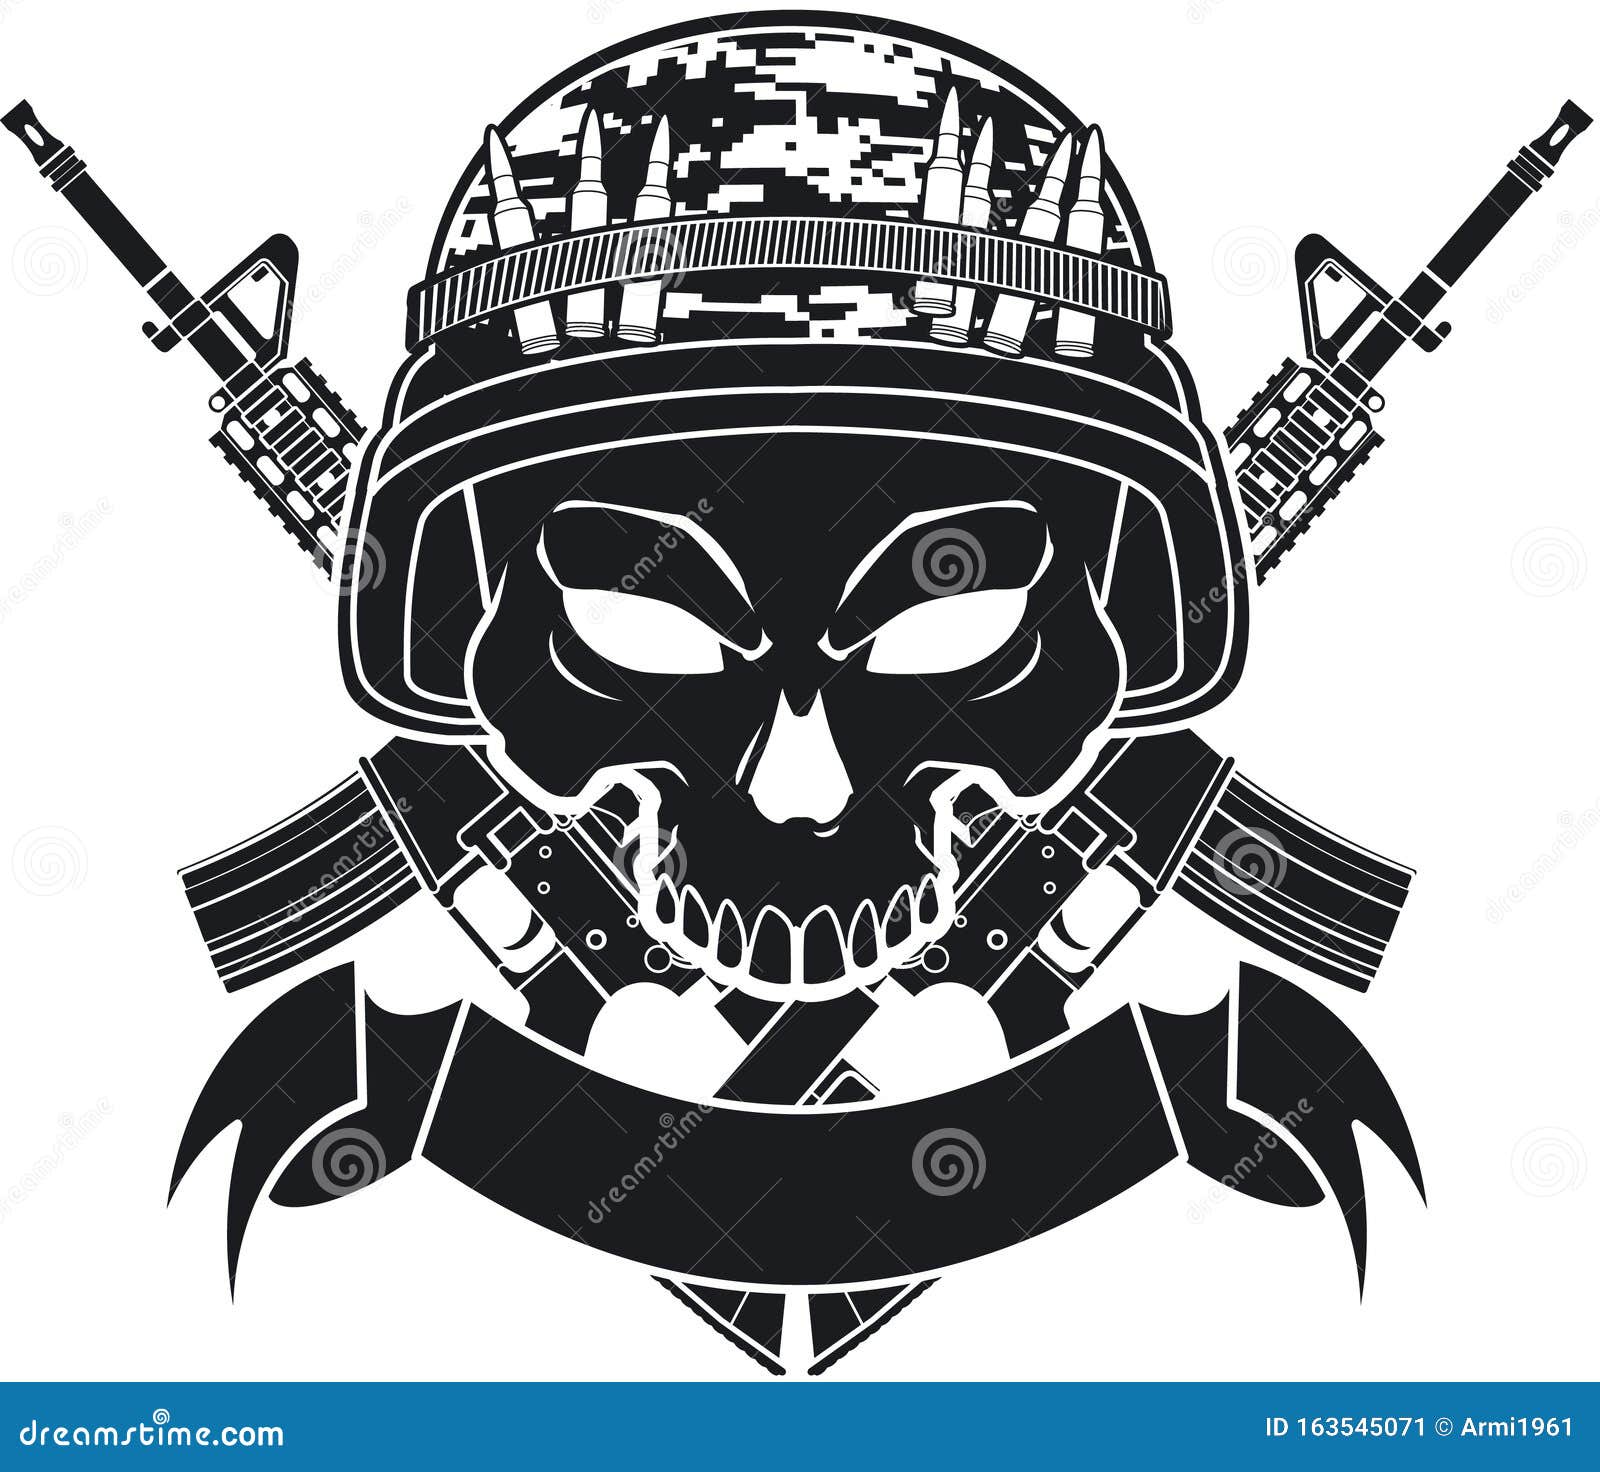 Military skull image stock vector. Illustration of forces - 163545071